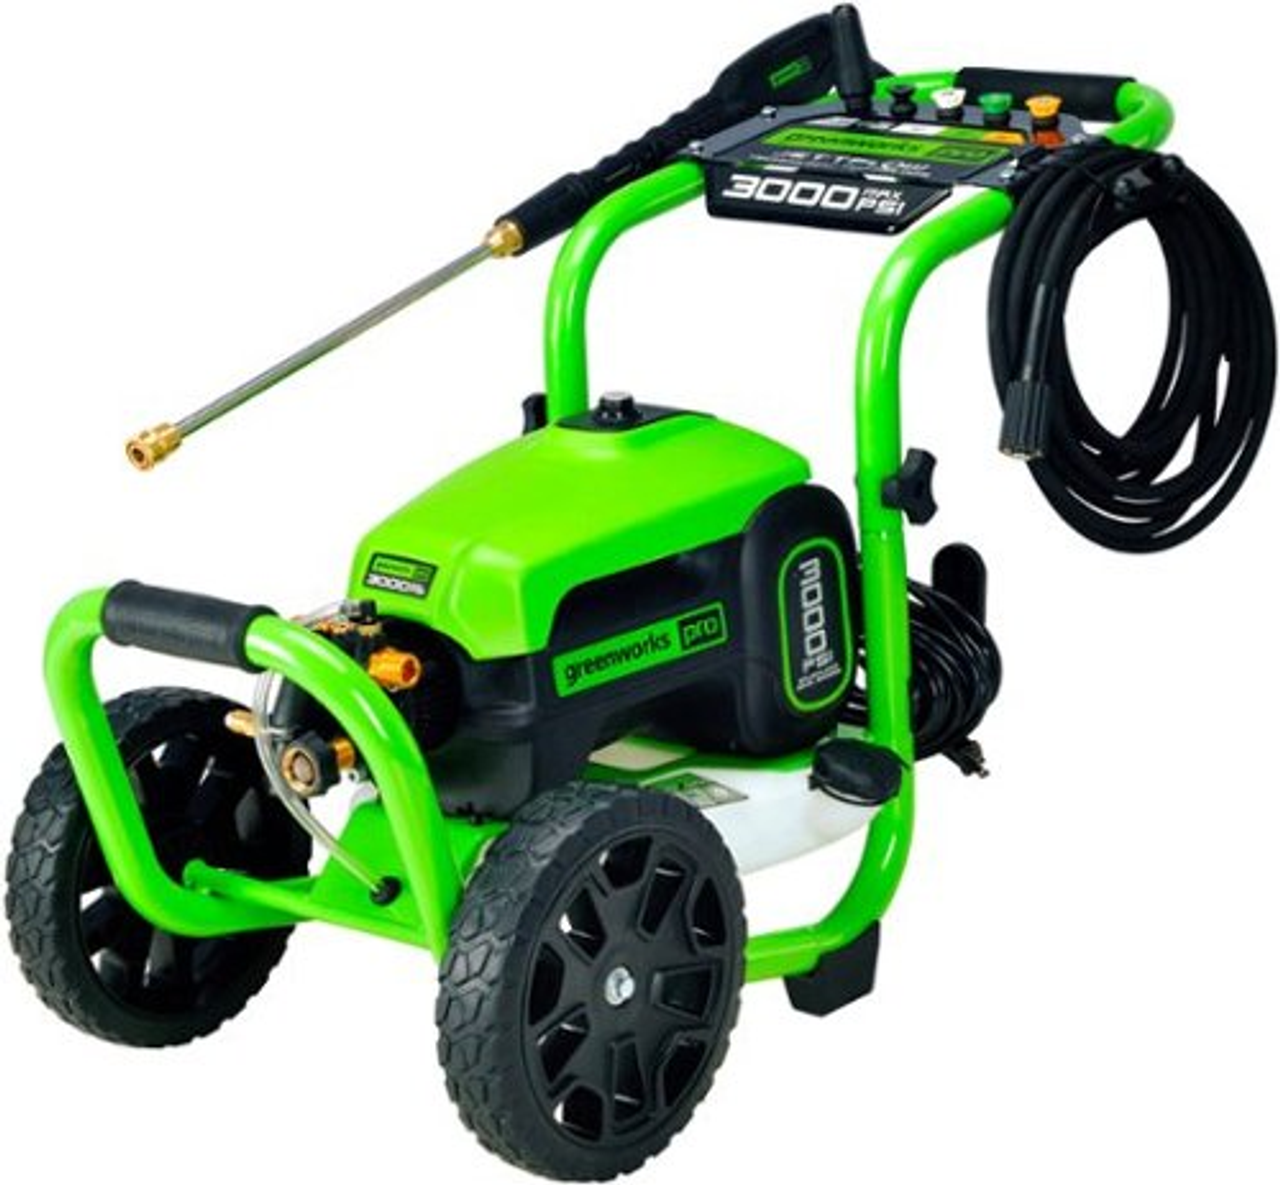 Greenworks - Pro  3000 PSI 2.0 GPM Cold Water Electric Pressure Washer - Green